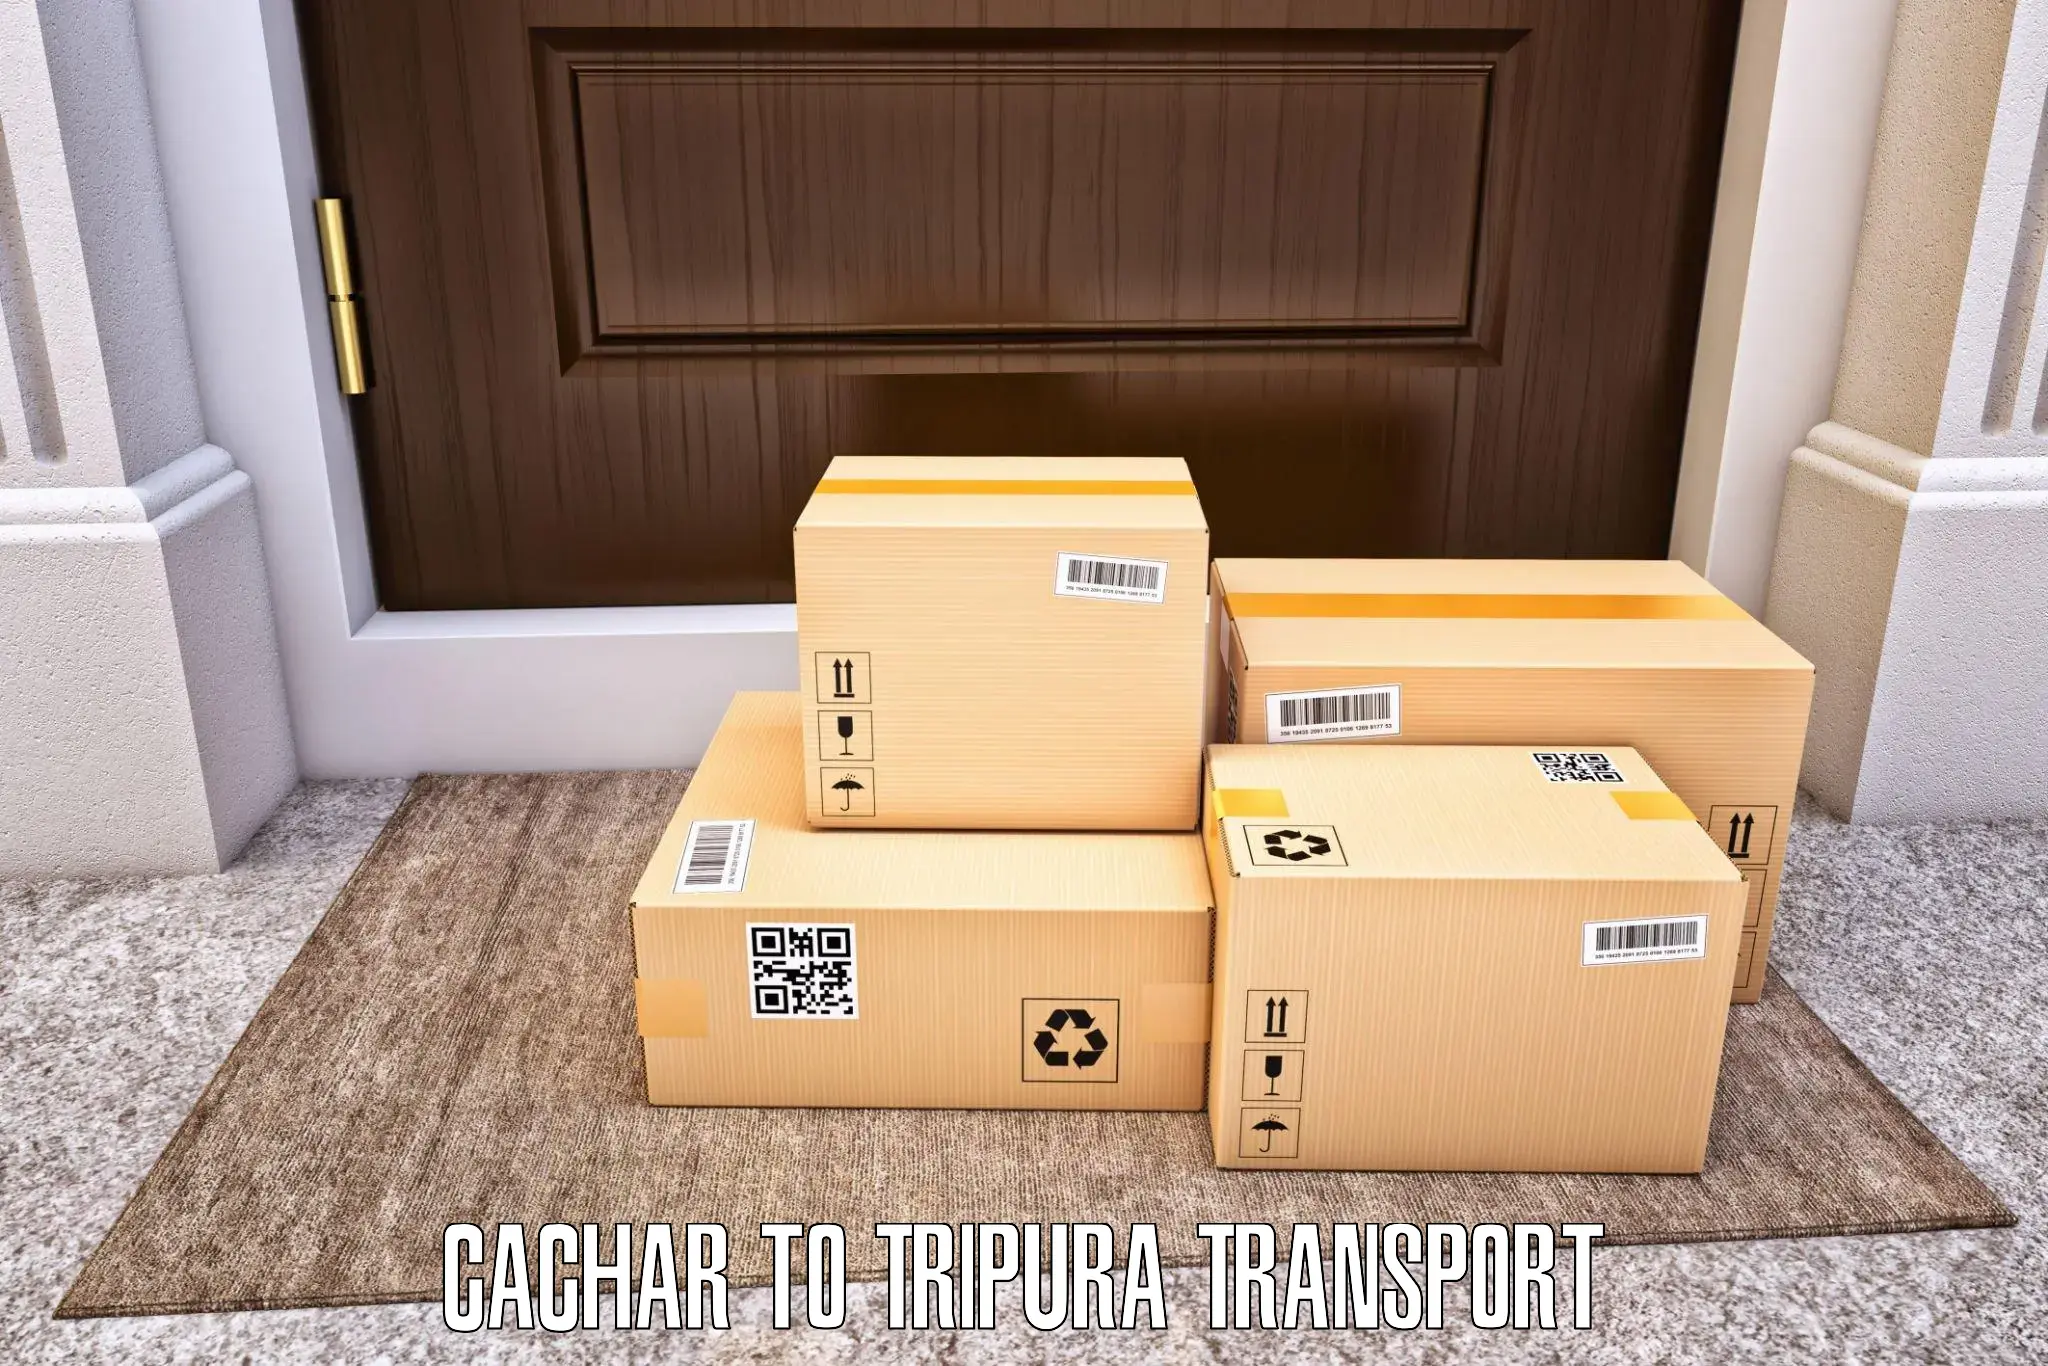 Truck transport companies in India Cachar to Tripura